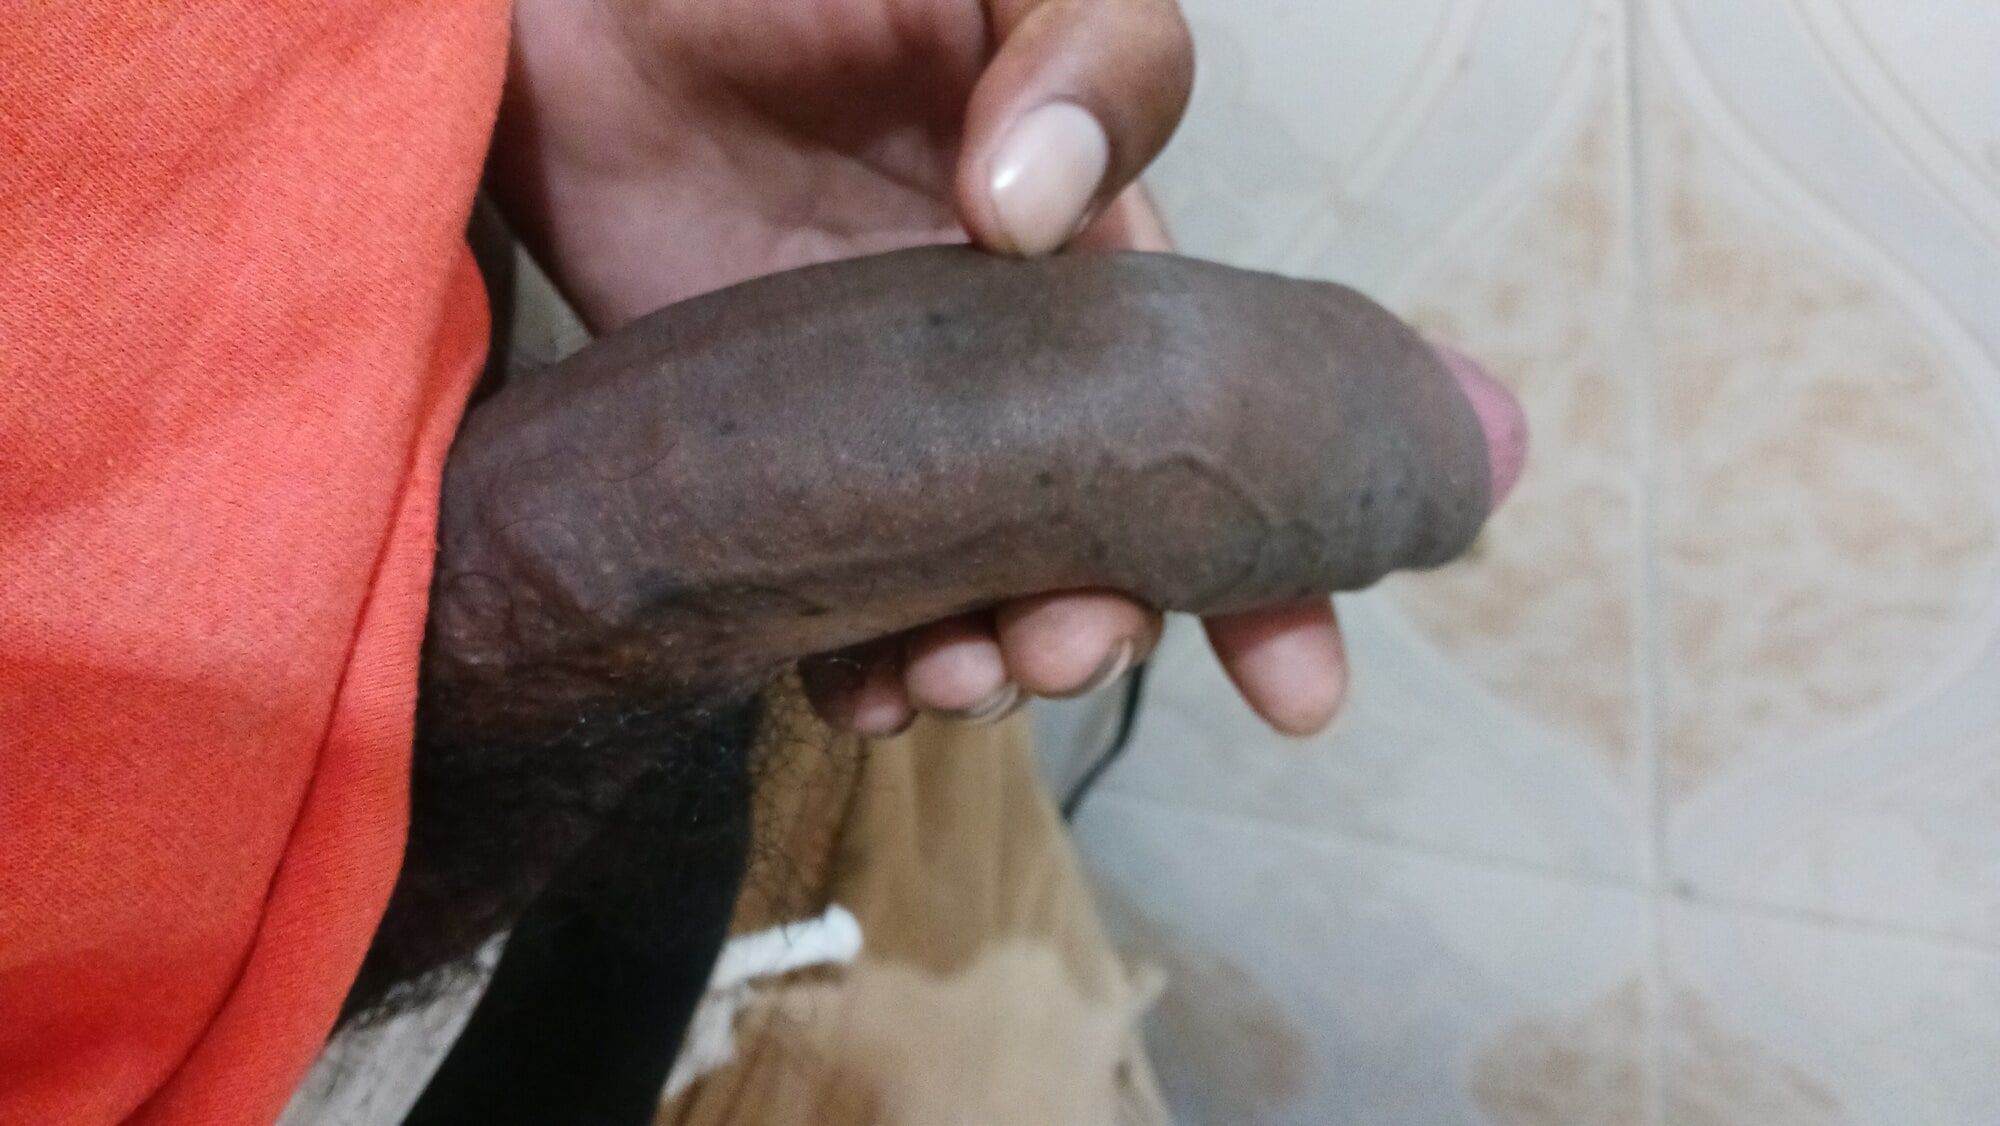 Candy cock black #8